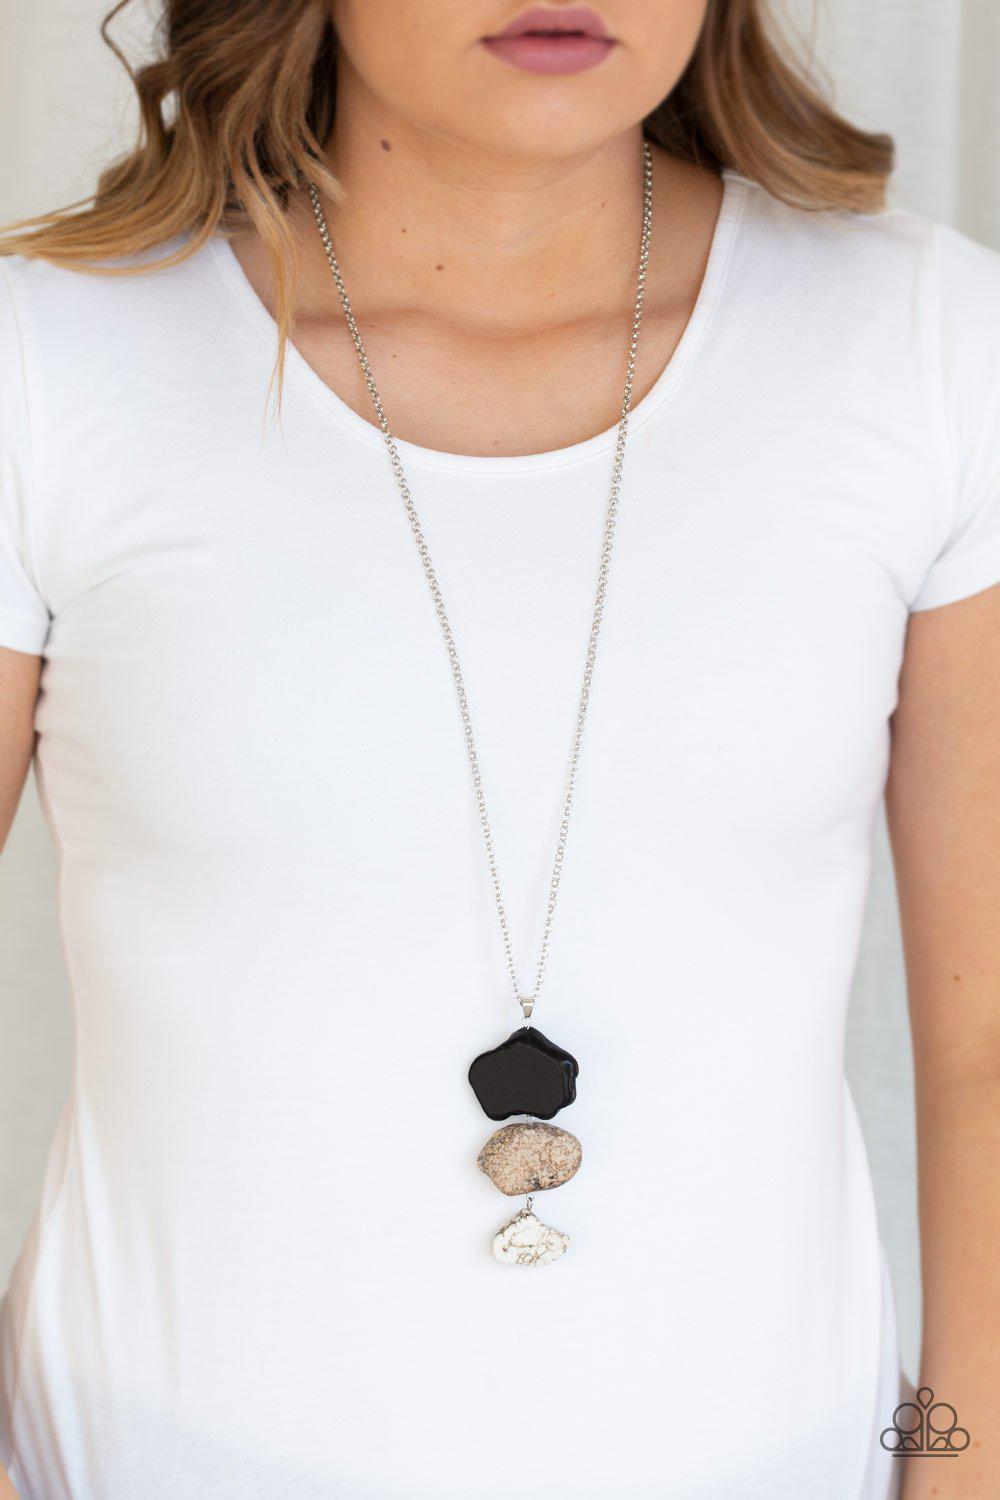 On The ROAM Again Multi Black, Brown and White Stone Necklace - Paparazzi Accessories- lightbox - CarasShop.com - $5 Jewelry by Cara Jewels